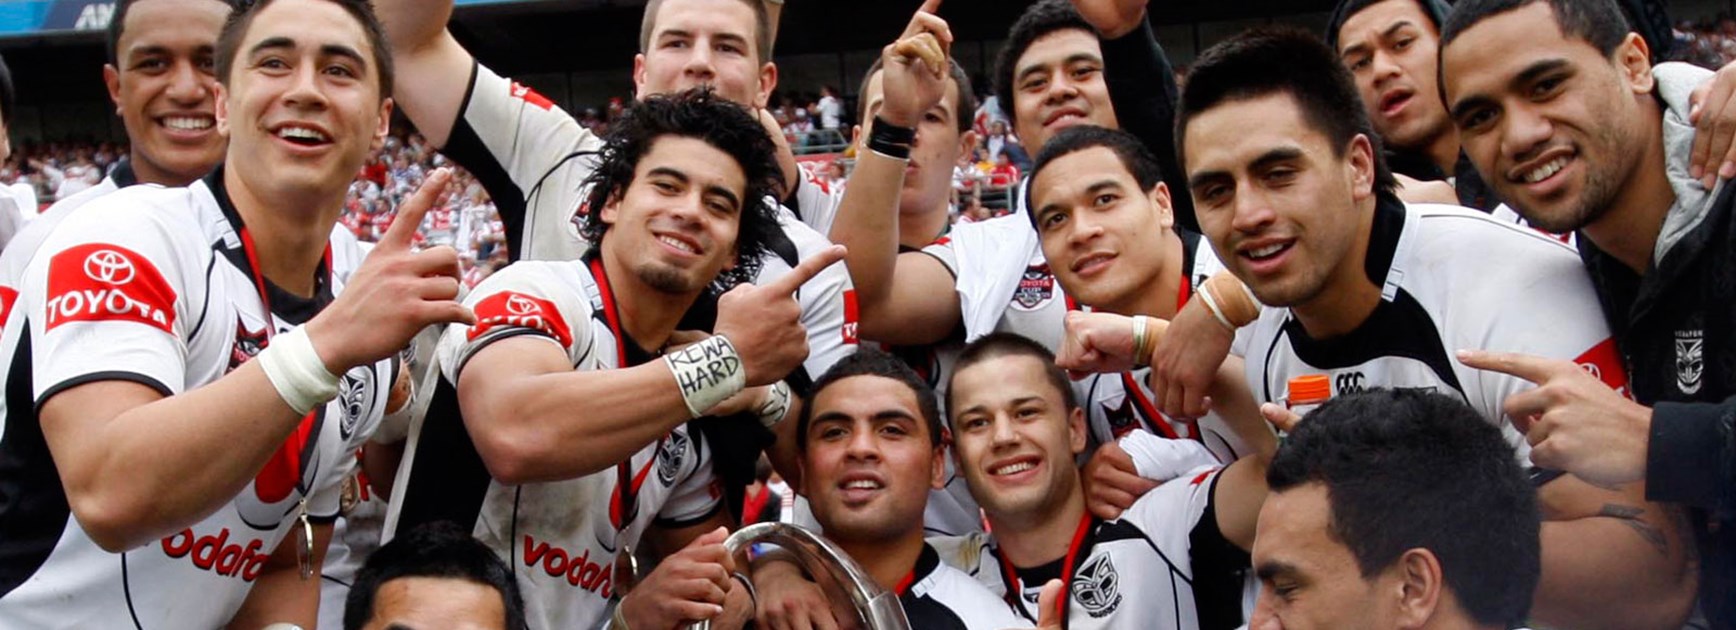 Mark Ioane and Matt Robinson (centre with trophy) and their Warriors teammates celebrate their NYC win in 2010.